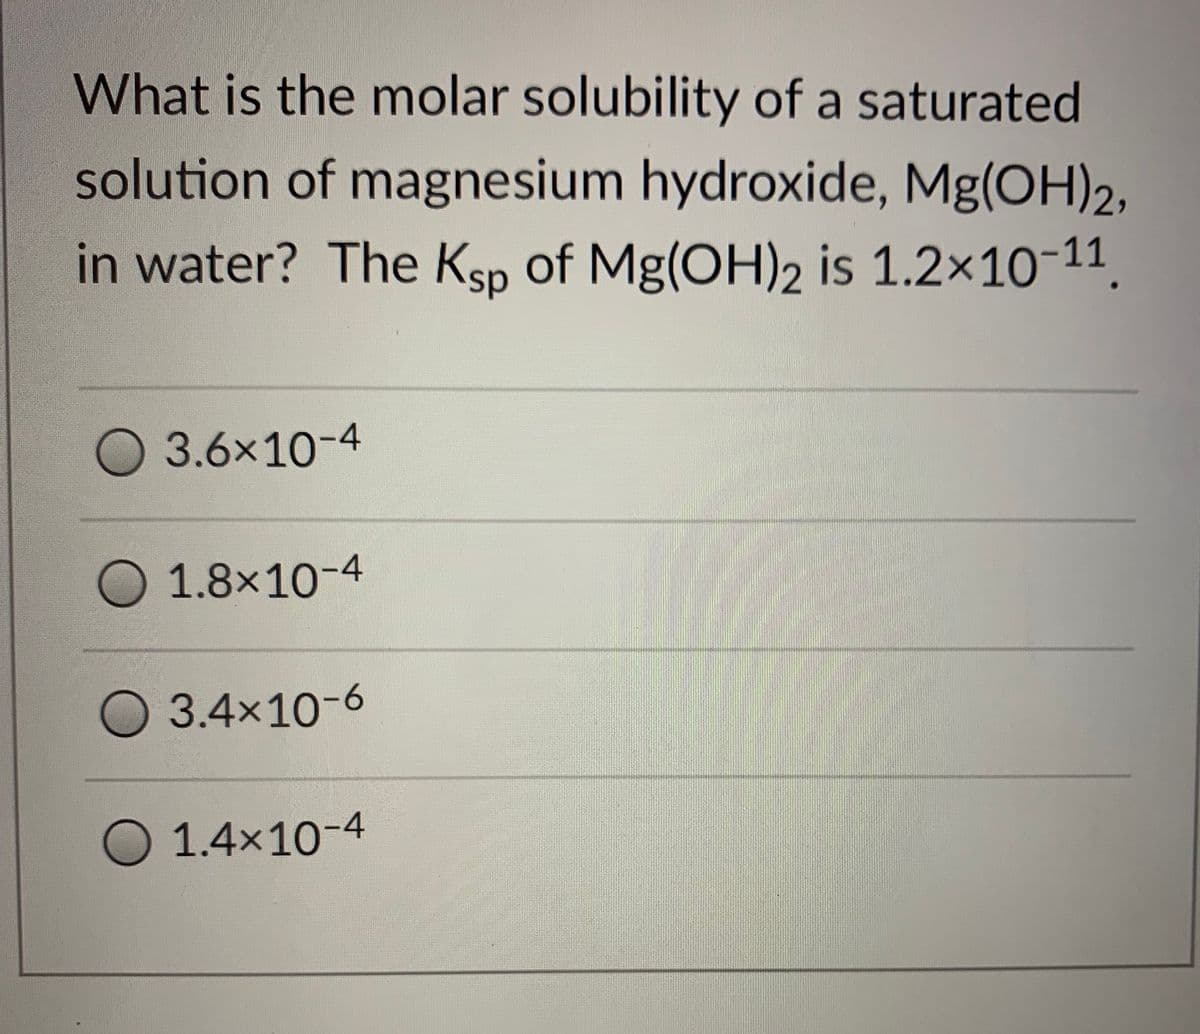 What is the molar solubility of a saturated
solution of magnesium hydroxide, Mg(OH)2,
in water? The Ksp of Mg(OH)2 is 1.2×10-11.
3.6x10-4
O 1.8×10-4
3.4x10-6
O 1.4x10-4
